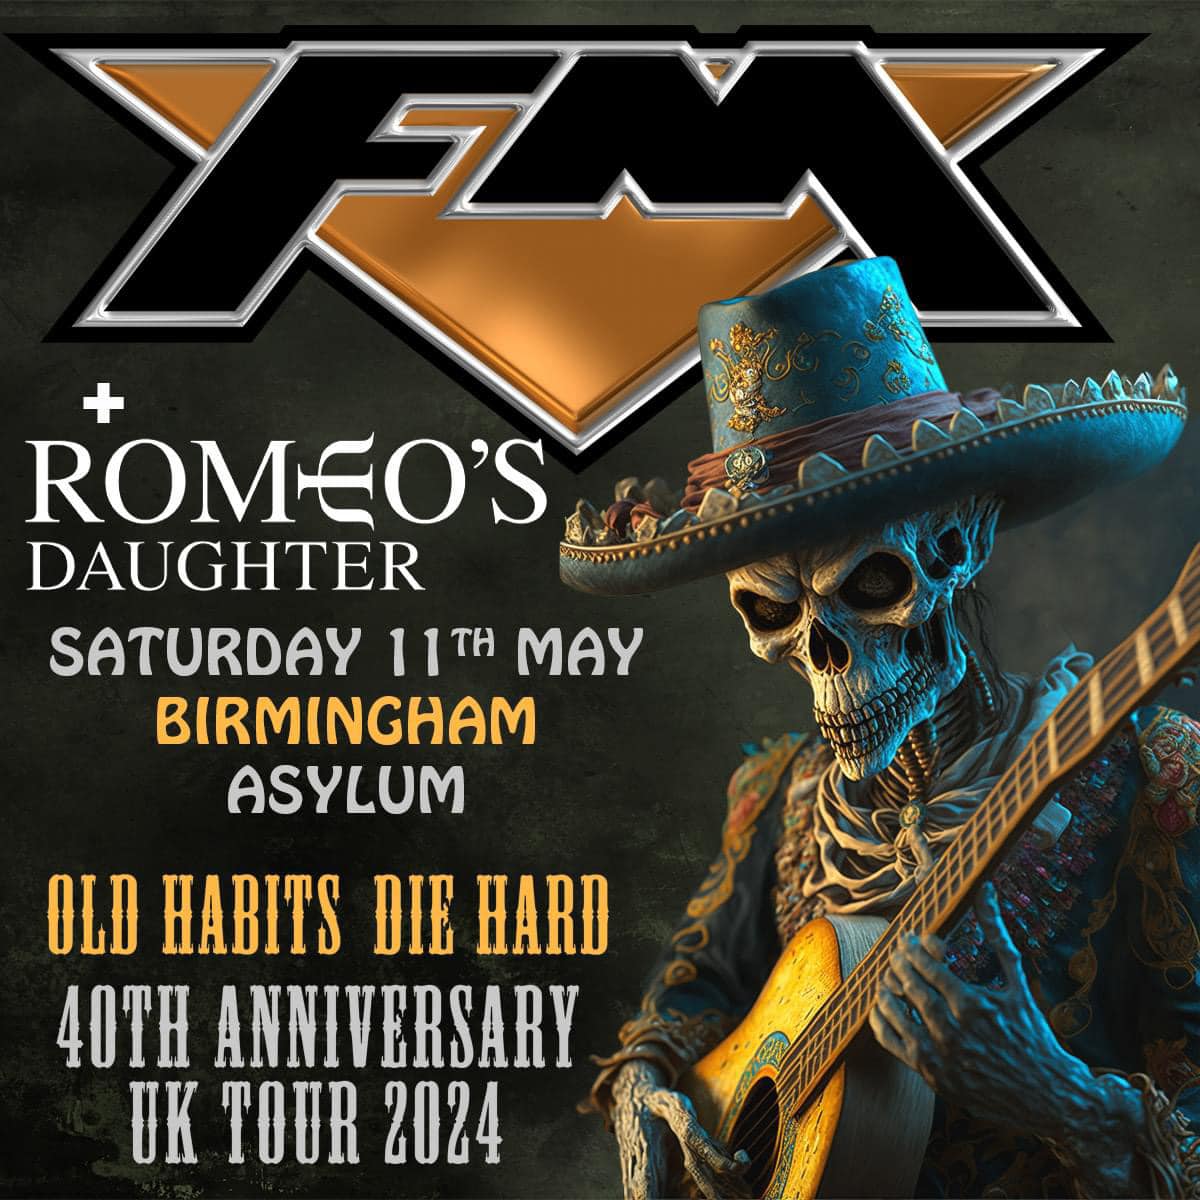 ONE MONTH TO GO!!! Don’t miss @romeosdaughter only date supporting the legendary @FMofficial at @TheAsylumVenue #Birmingham #UK on Saturday 11th May 2024! TICKETS: theasylumvenue.co.uk/events/fm-asyl… #RomeosDaughter #FM #AOR #RomeosDaughterAOR #Rock #Rockmusic #ClassicRock #RockAndRoll